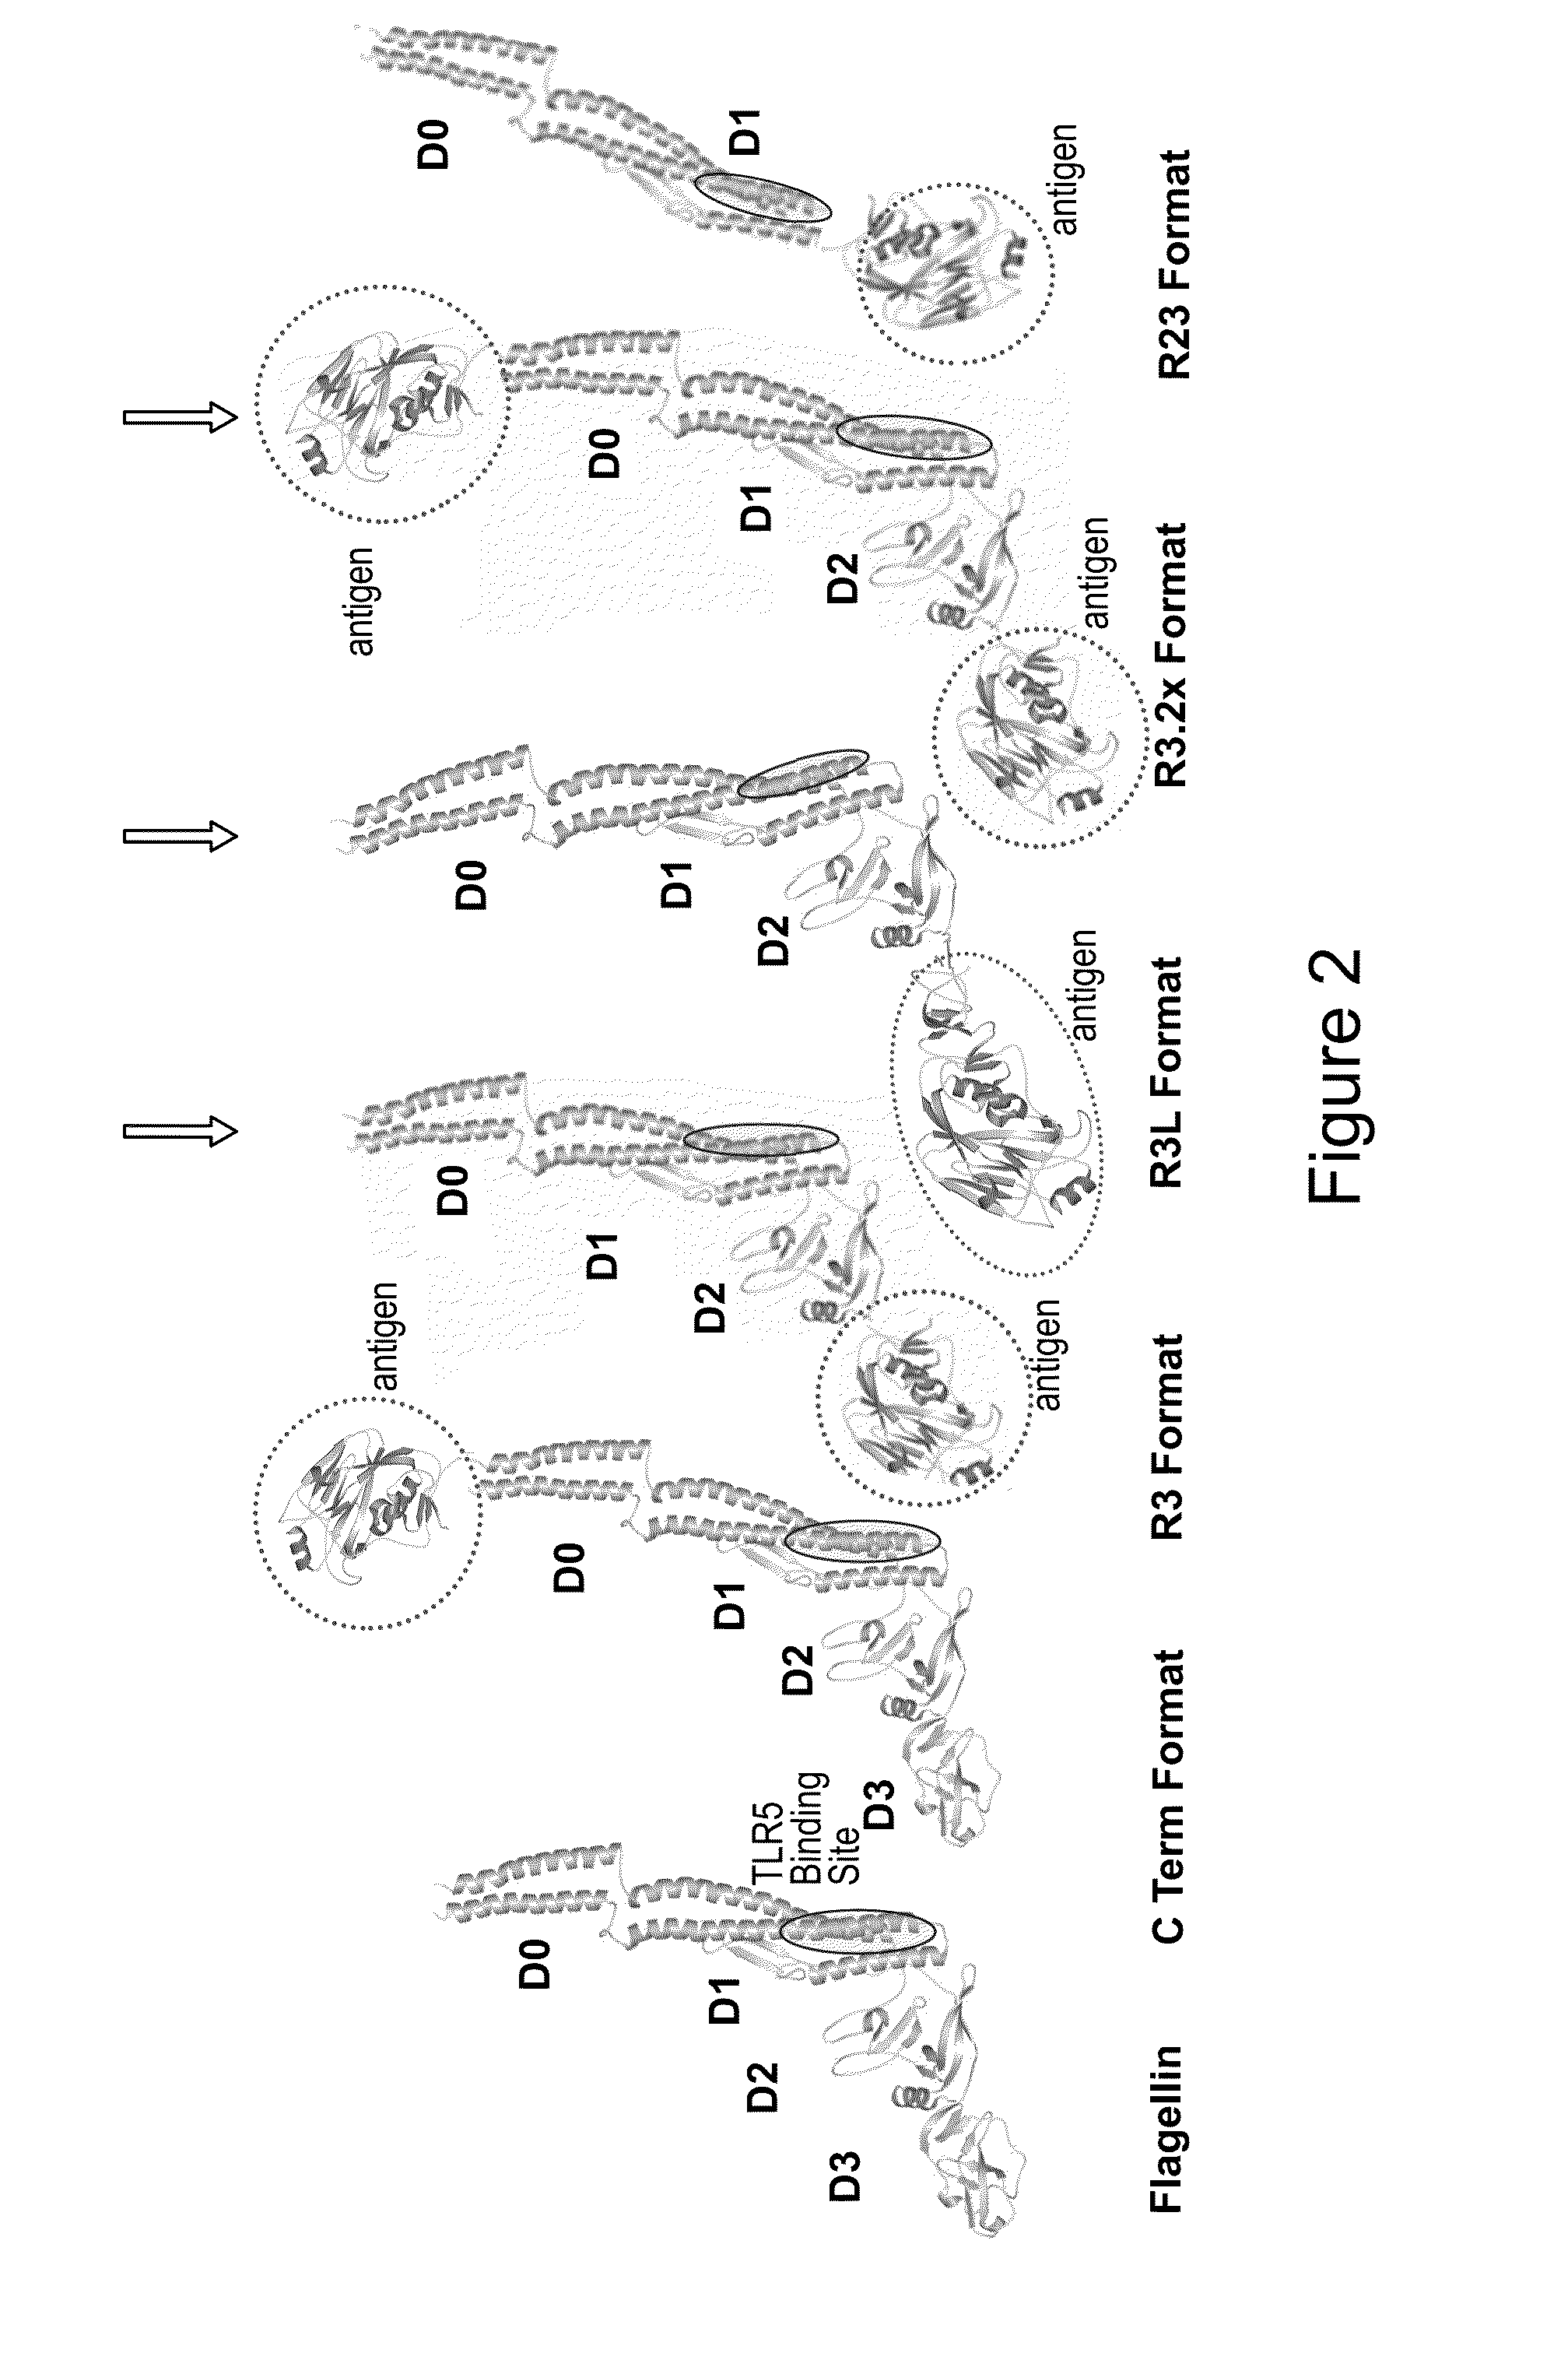 Immunologic Constructs and Methods